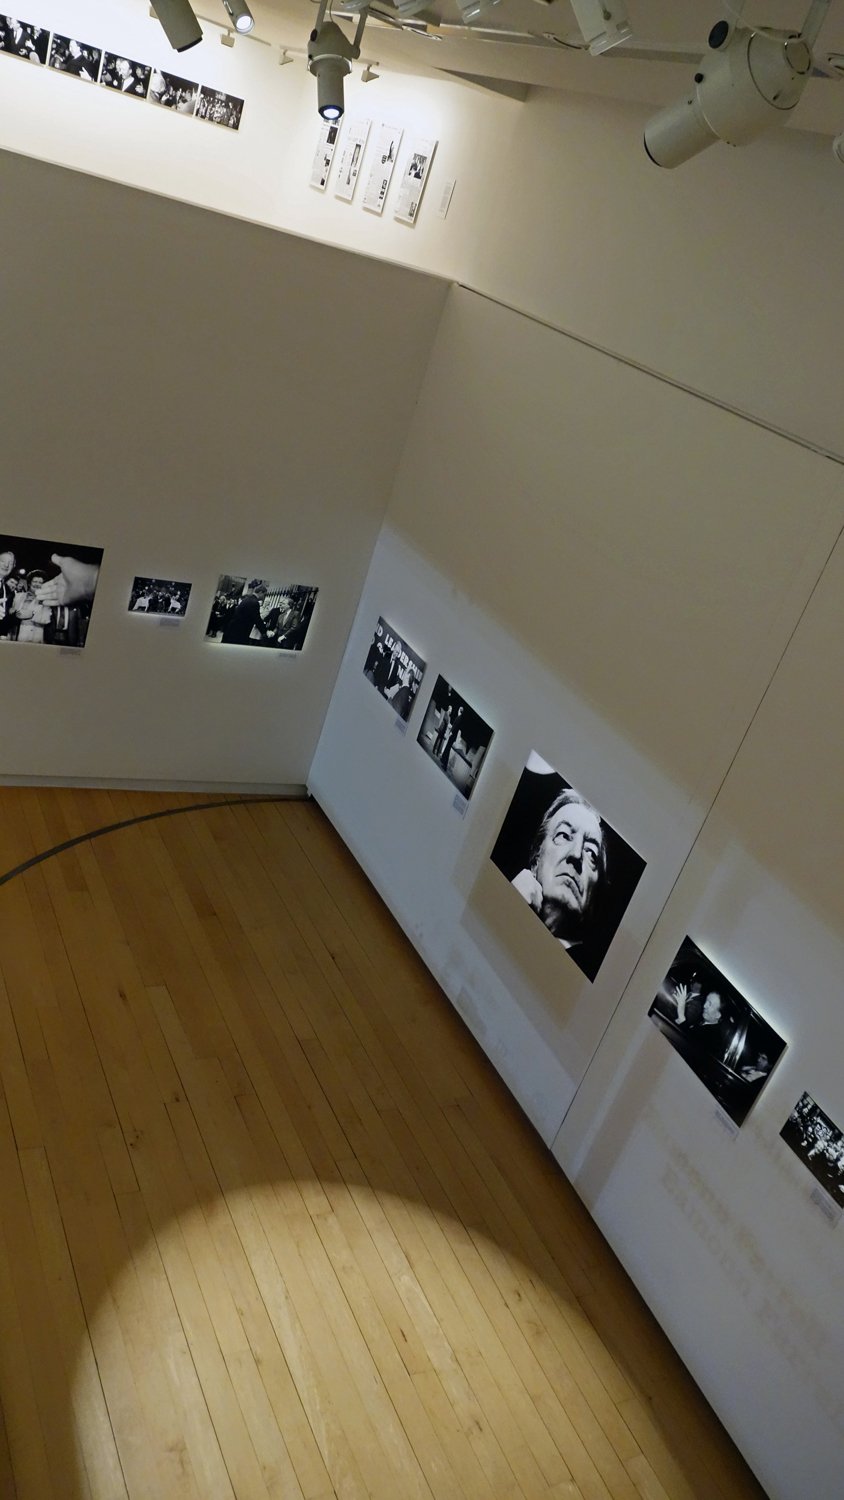  The exhibition in the Gallery of Photography 